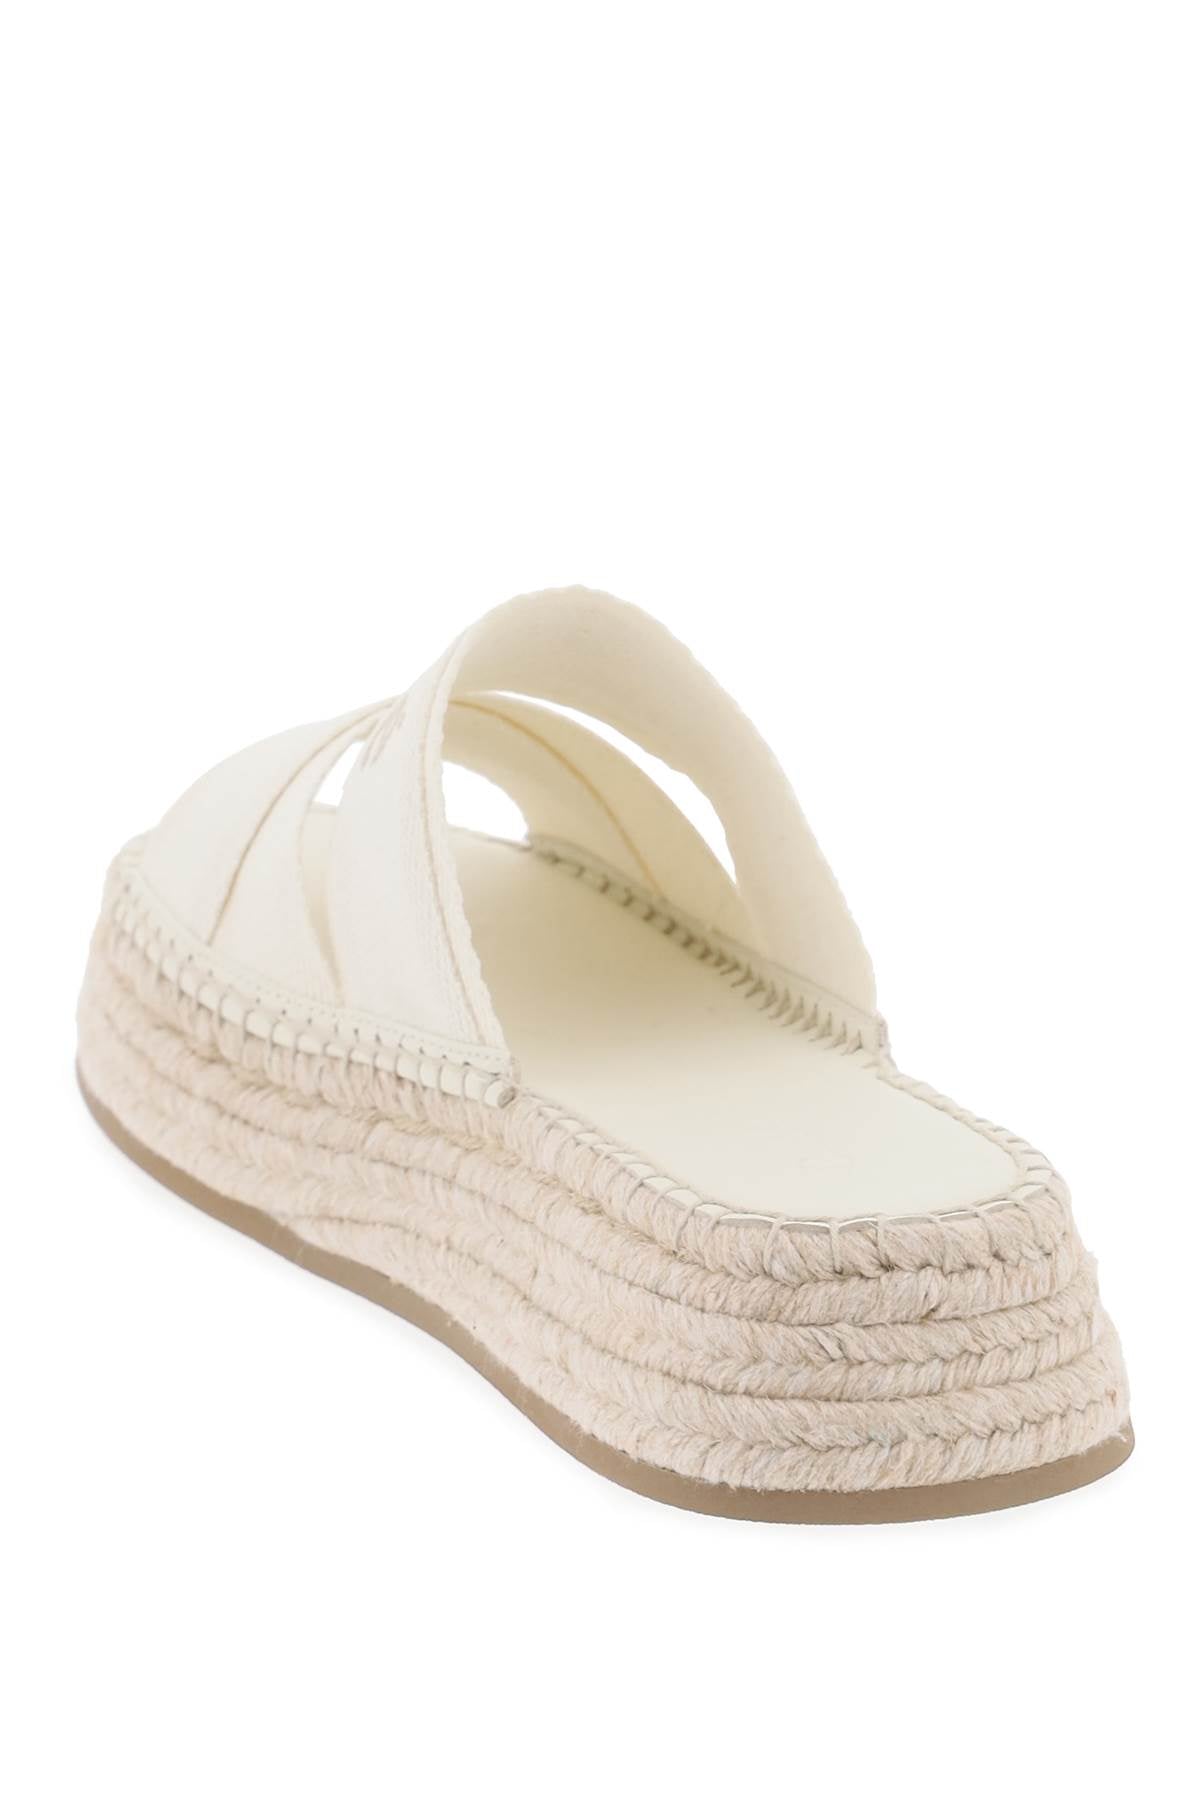 CHLOÉ Ivory Criss-Cross Sandals with Logo Detail and Espadrille Heel